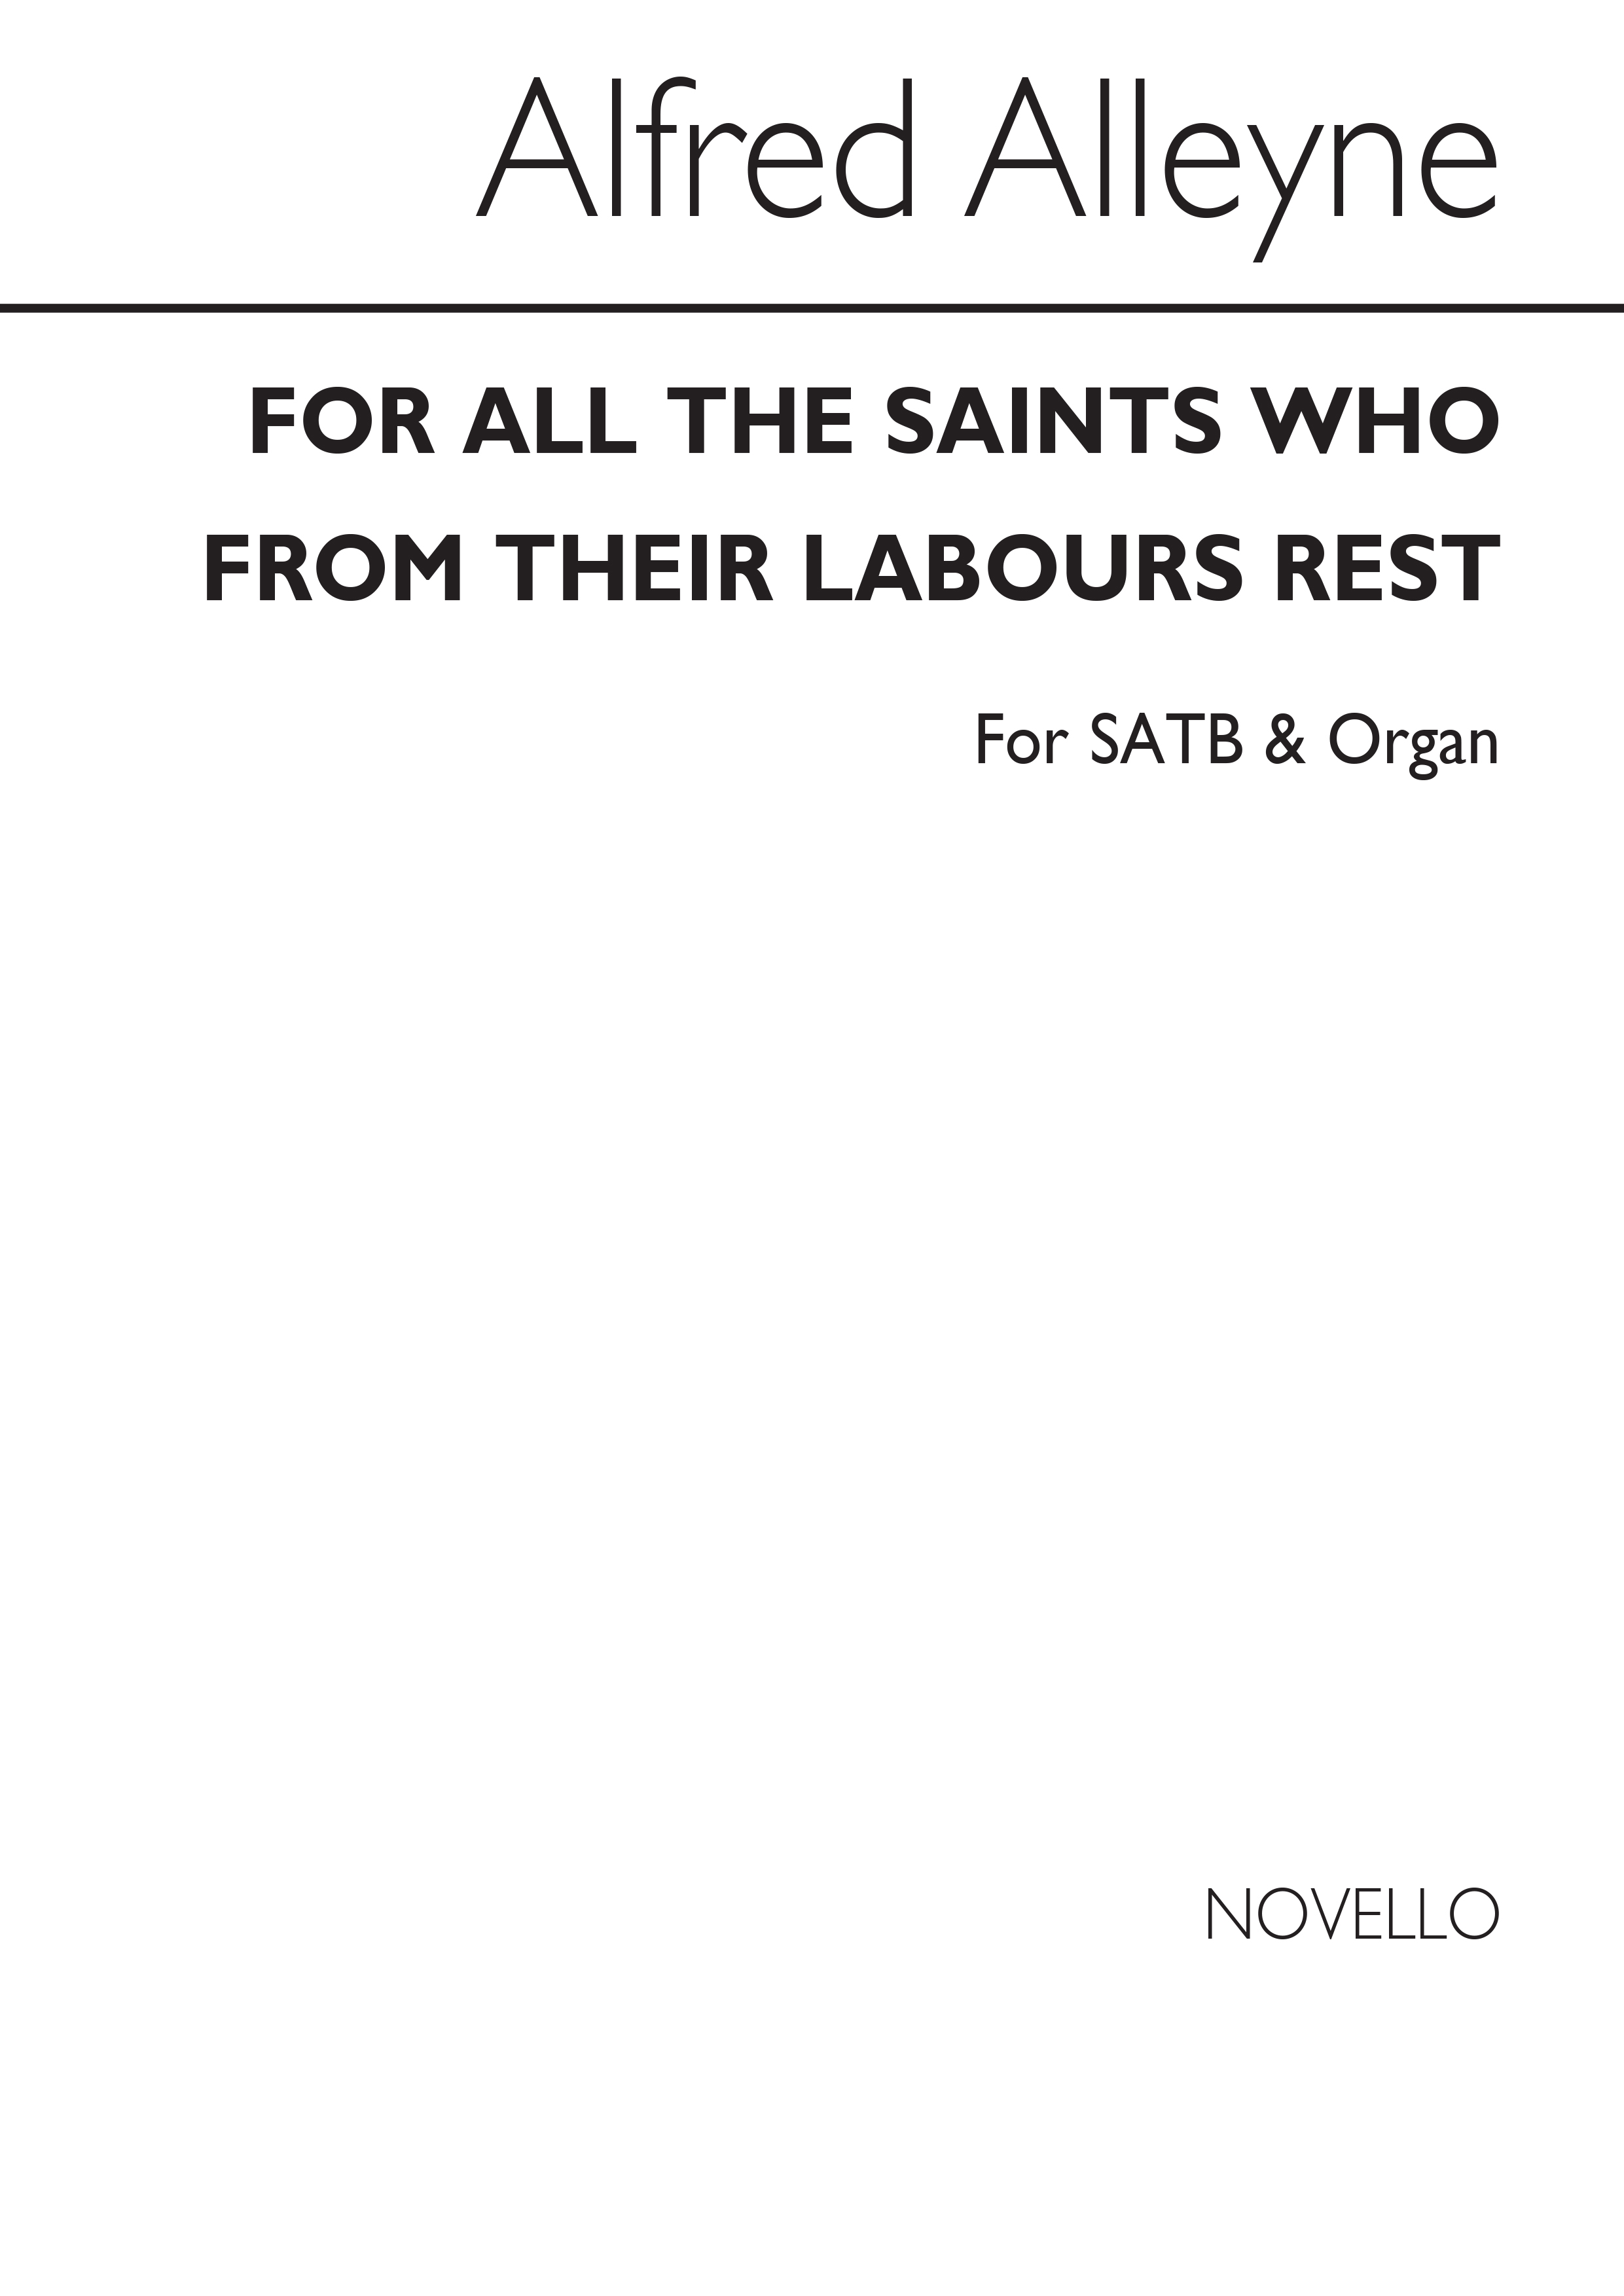 Alfred Alleyne: For All The Saints Who From Their Labours Rest(Hymn)satb/Organ